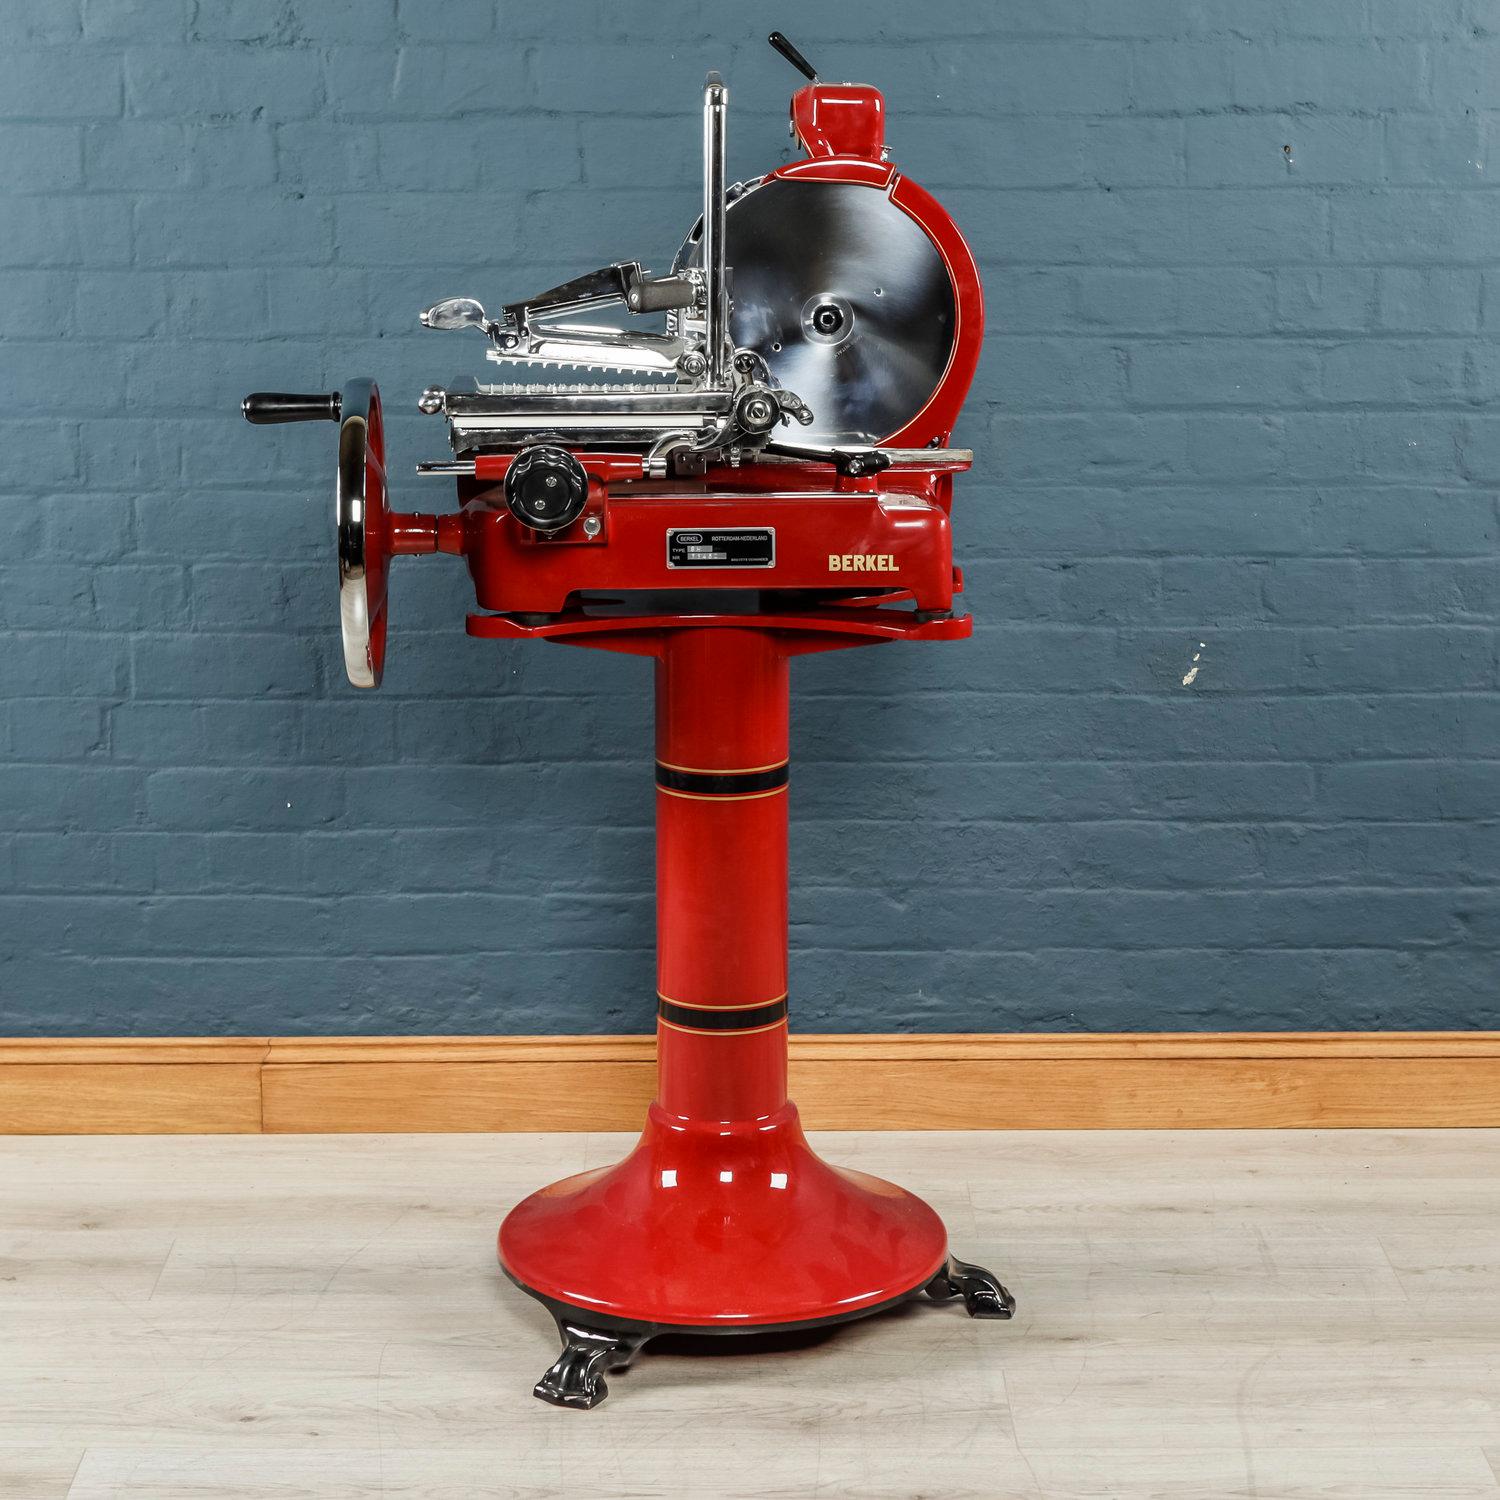 A rare meat slicer made by one of the most famous manufacturers: Berkel, Holland. This model is an H9 and comes in two parts, the base which can be removed from the main machine and placed on a counter. Perfect proportions for both domestic and